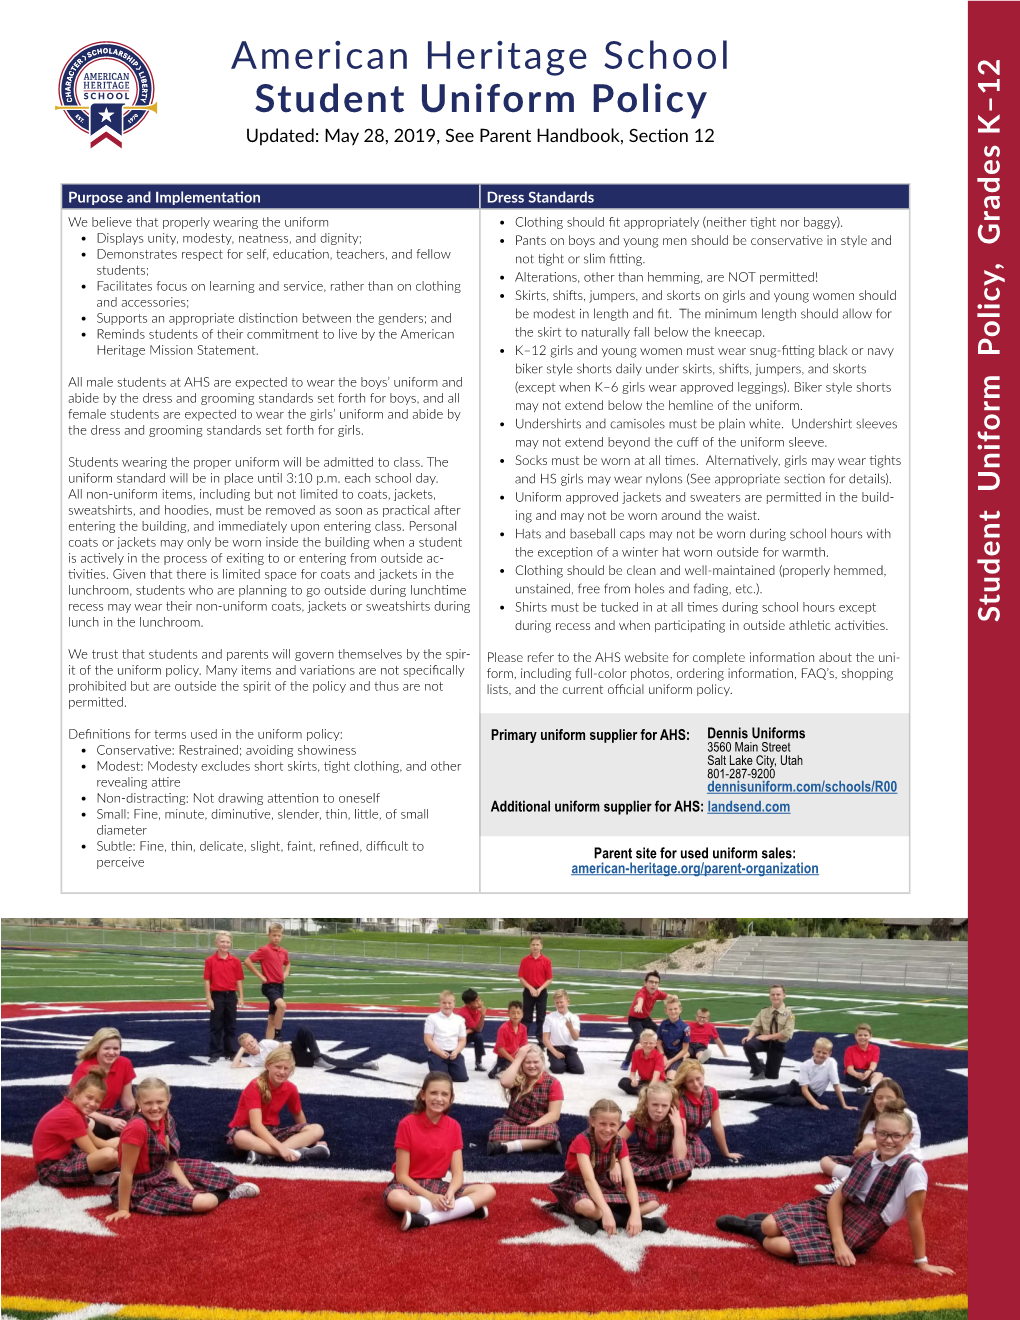 American Heritage School Student Uniform Policy Updated: May 28, 2019, See Parent Handbook, Section 12